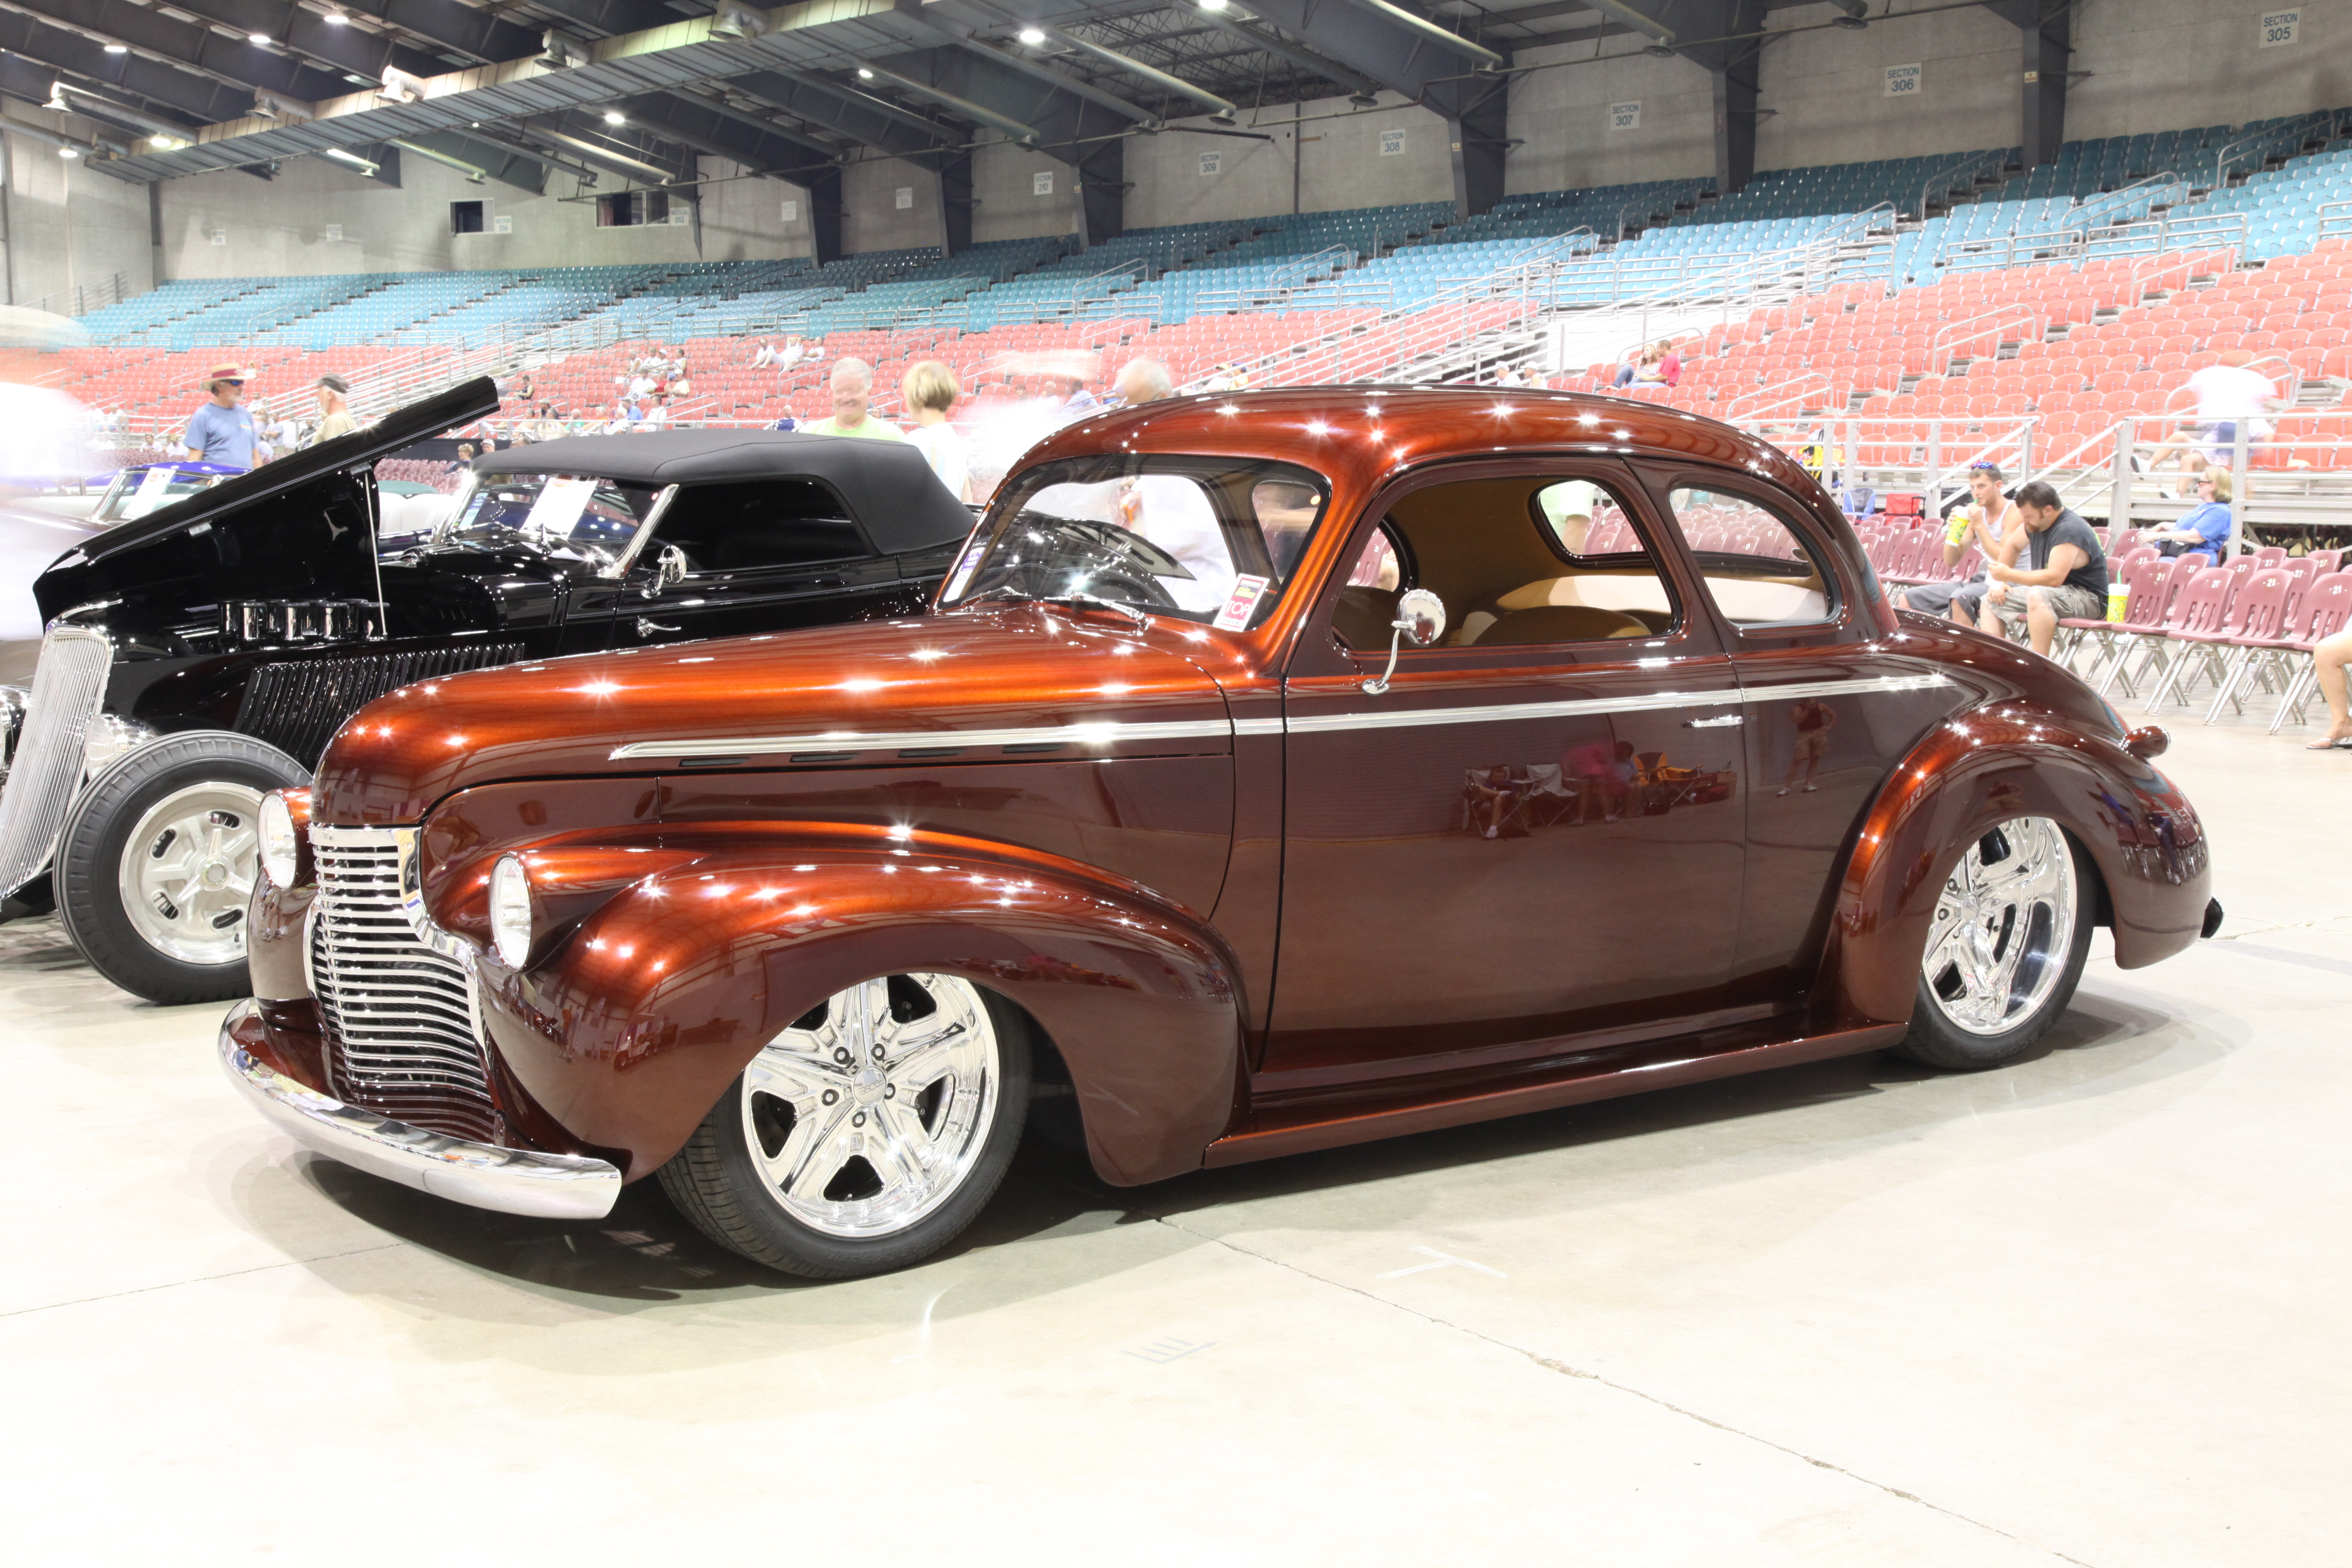 Images of 1940 Chevrolet Coupe | 5616x3744